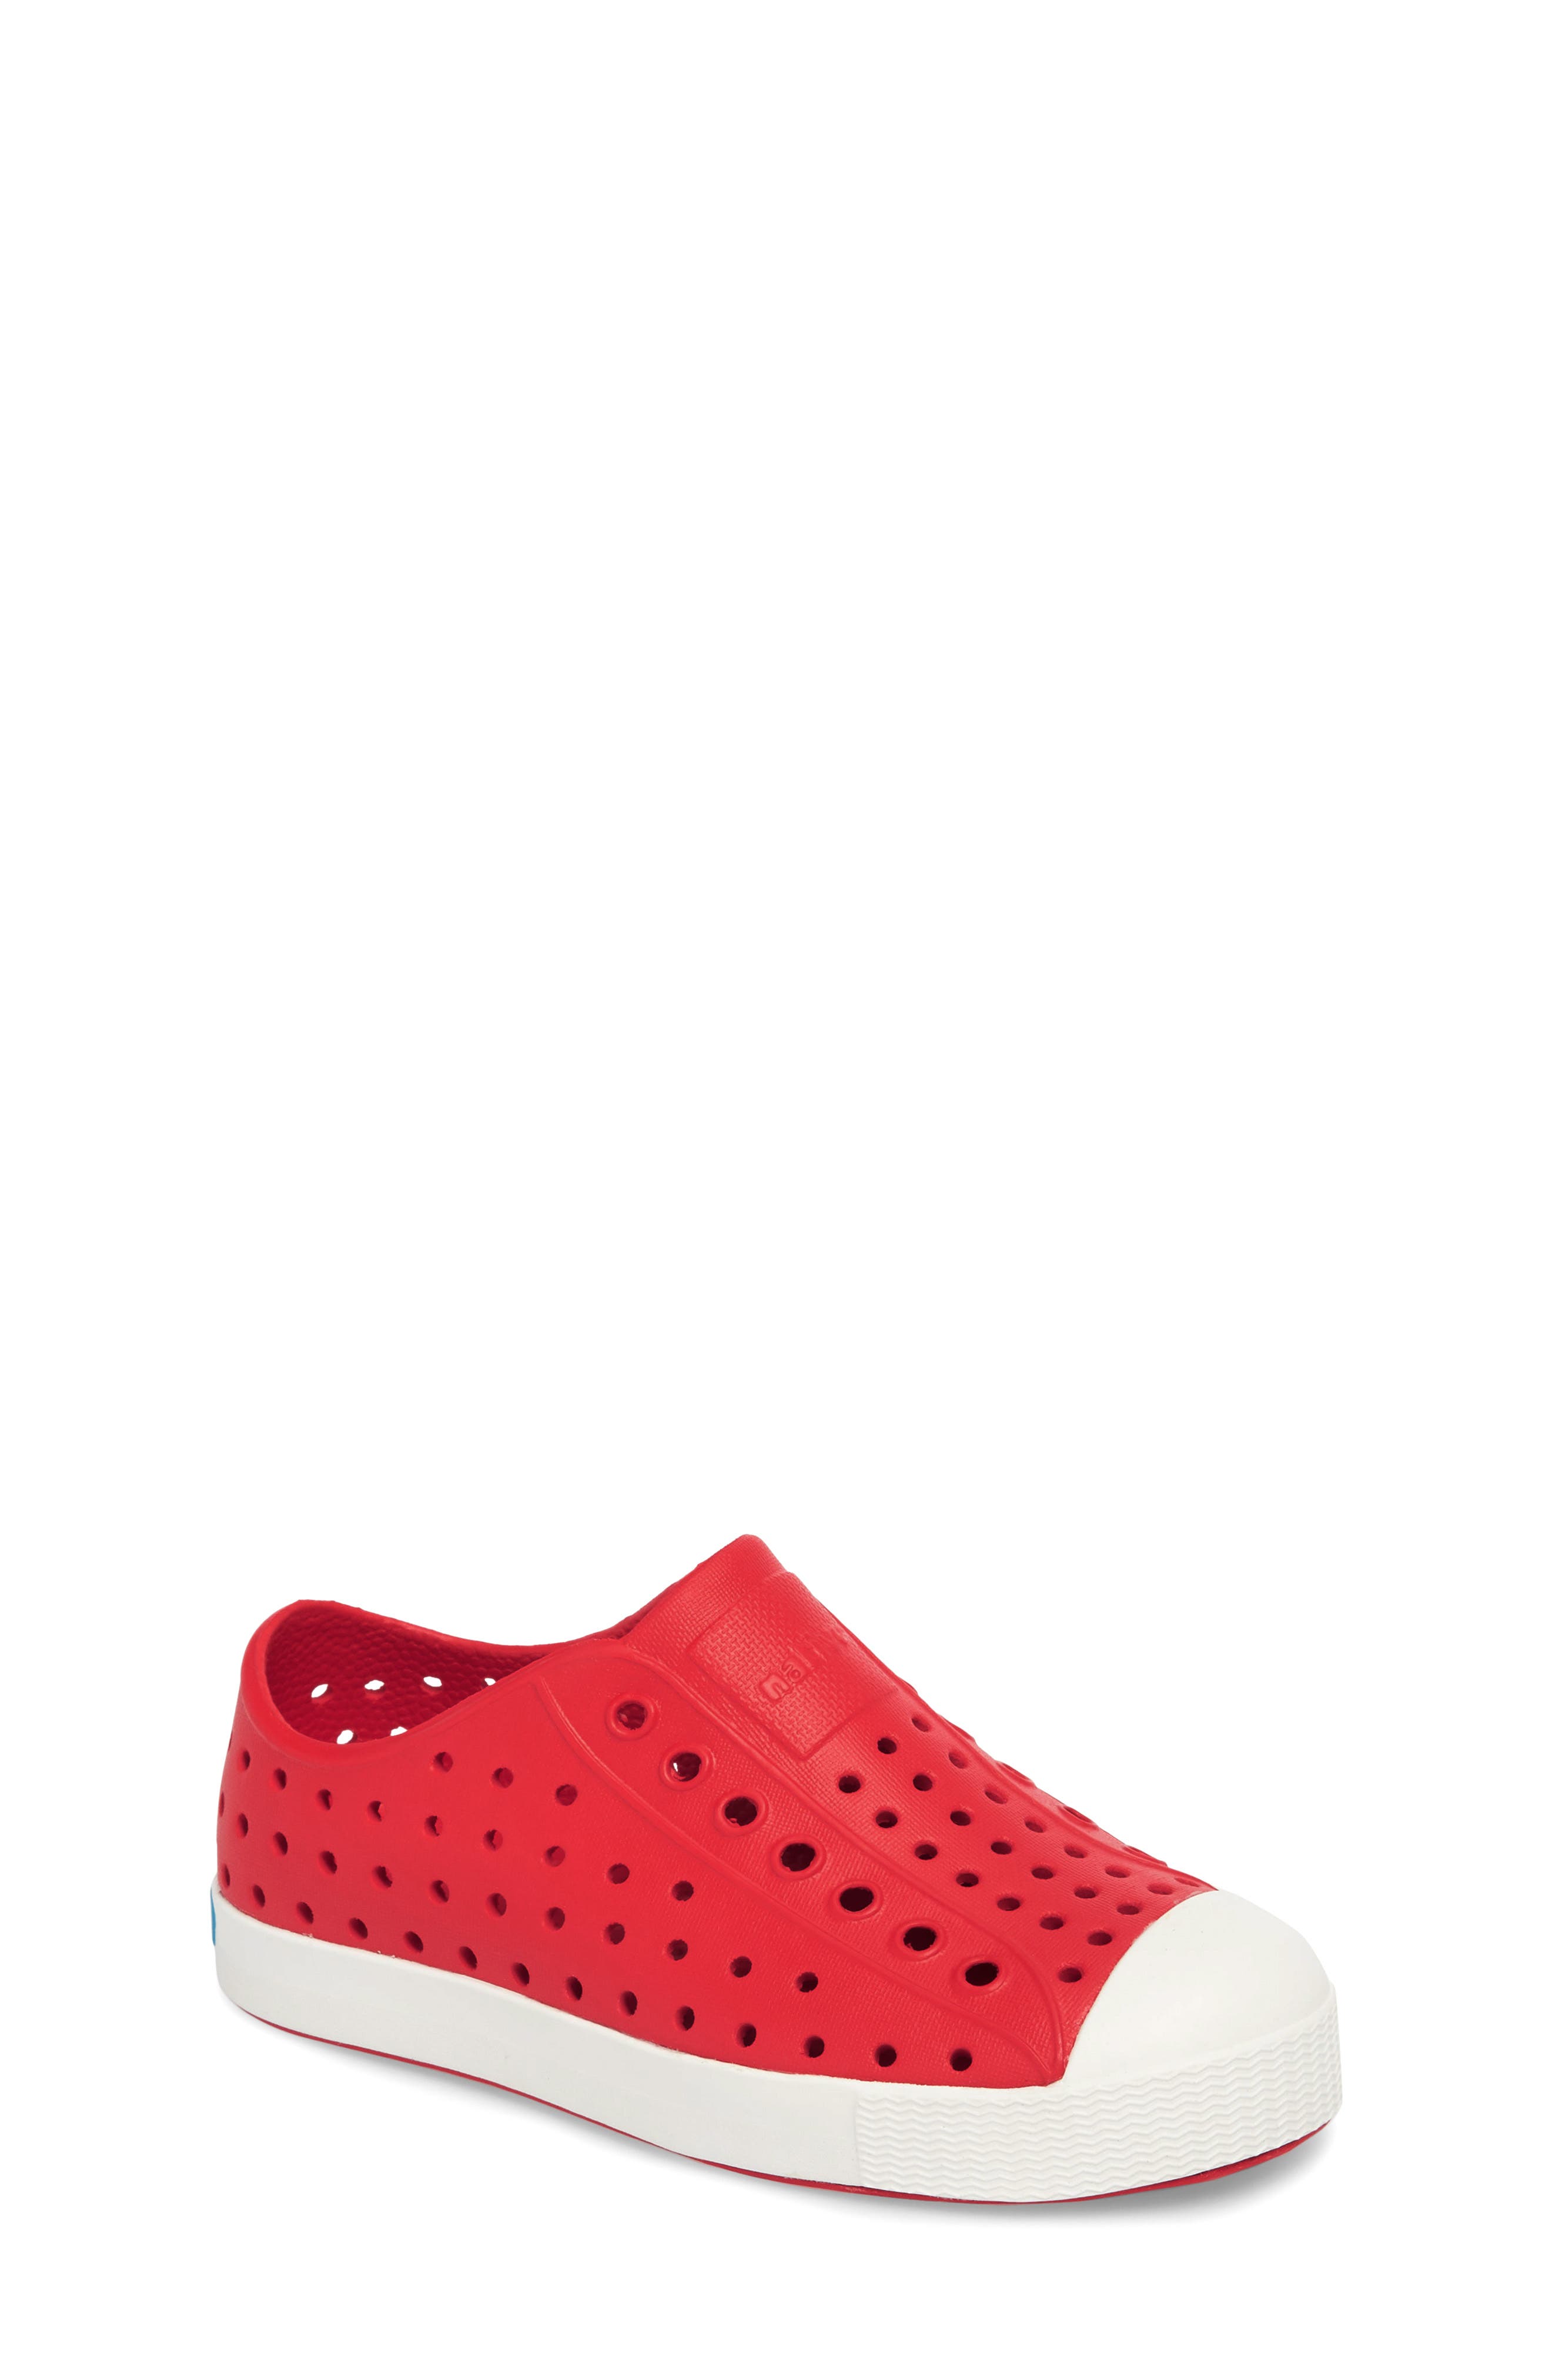 red girl shoe